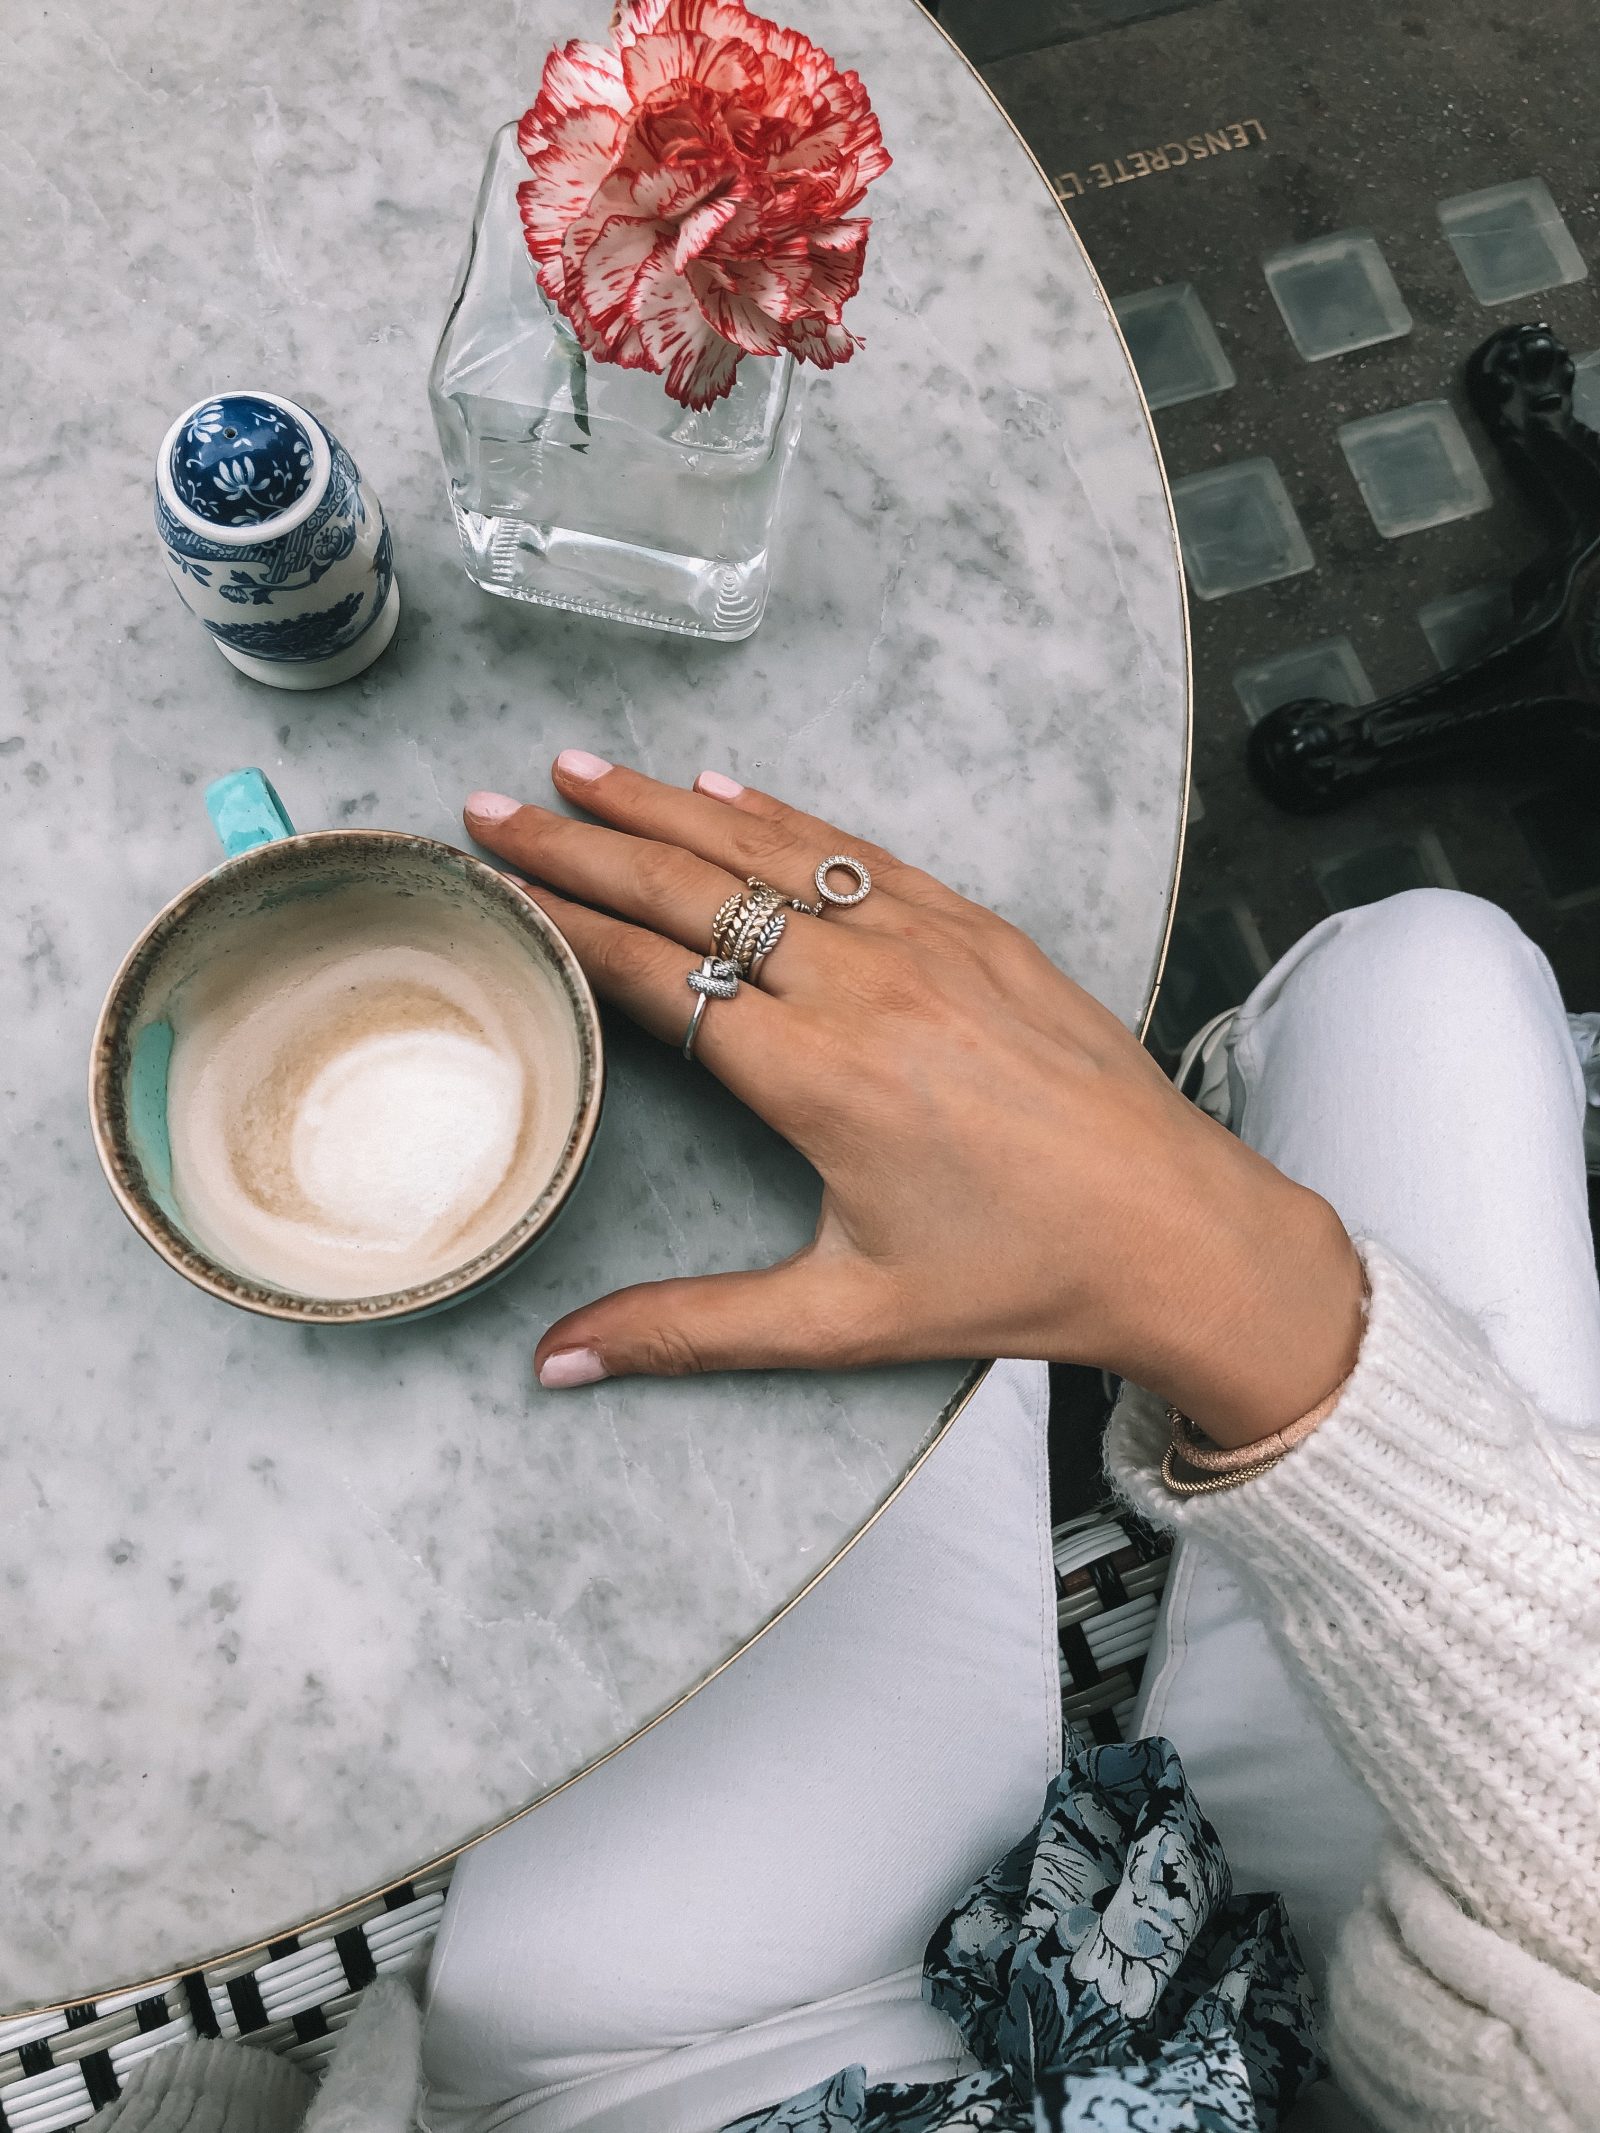 Pandora Ring Collection - Amazing Pandora Discount Code - SINEAD15 for 15% off!